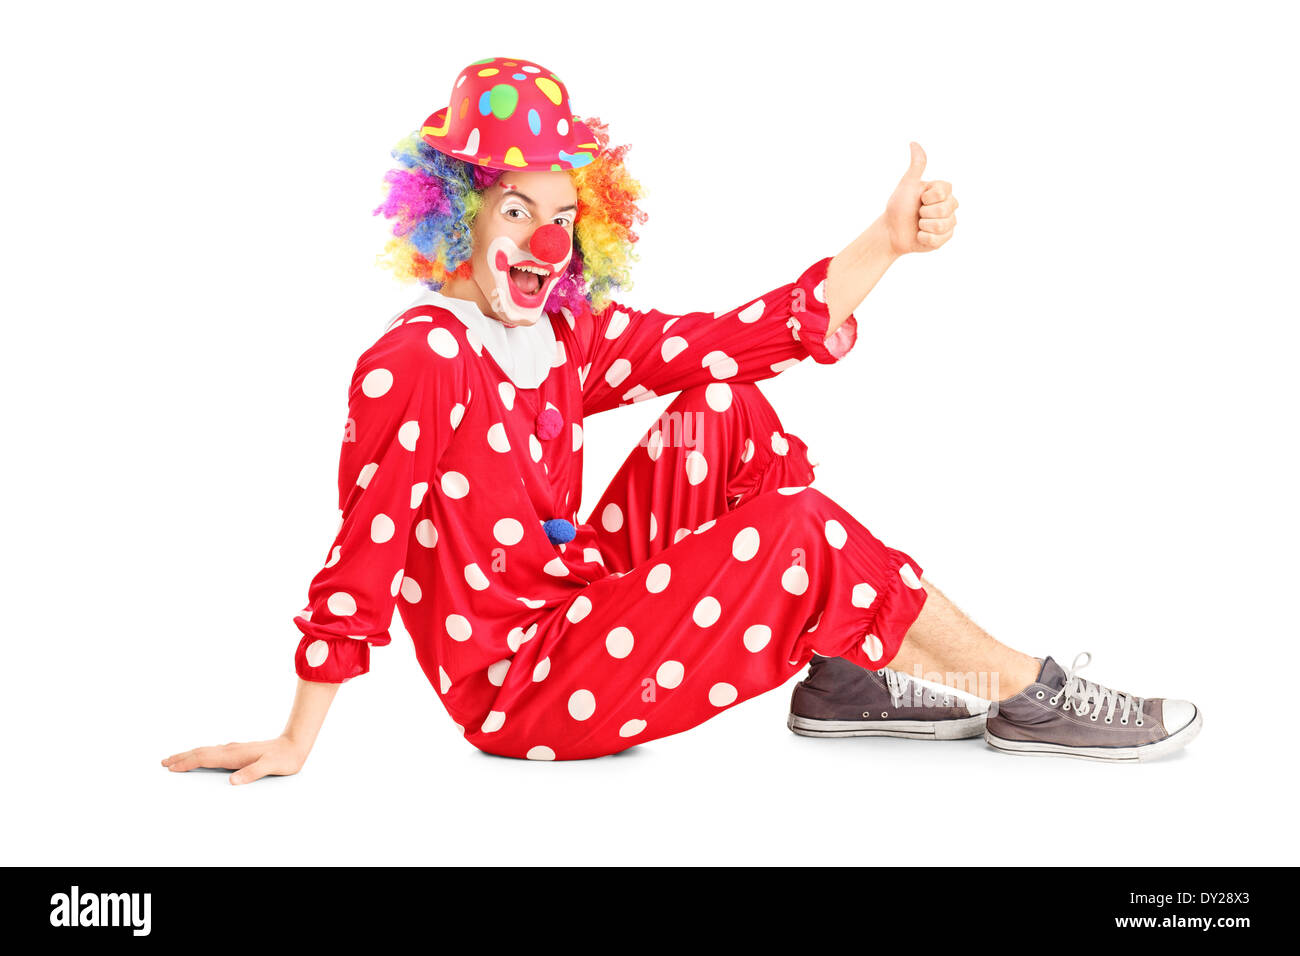 Clown sitting on the floor and giving thumb up Stock Photo